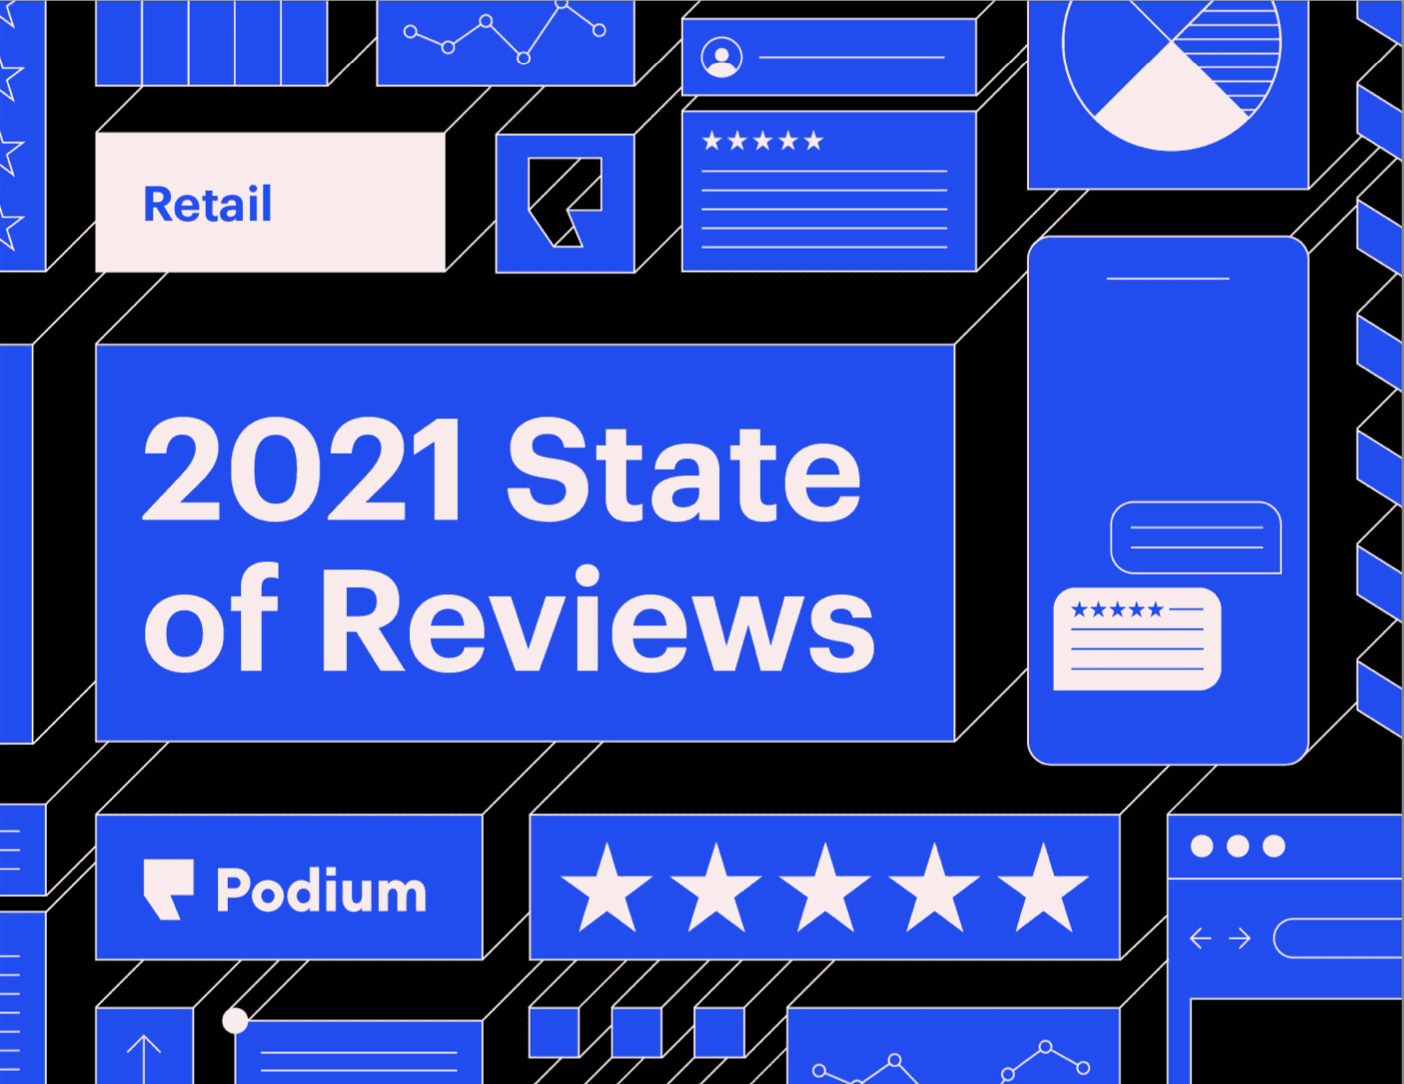 2021 Retail Review Trends